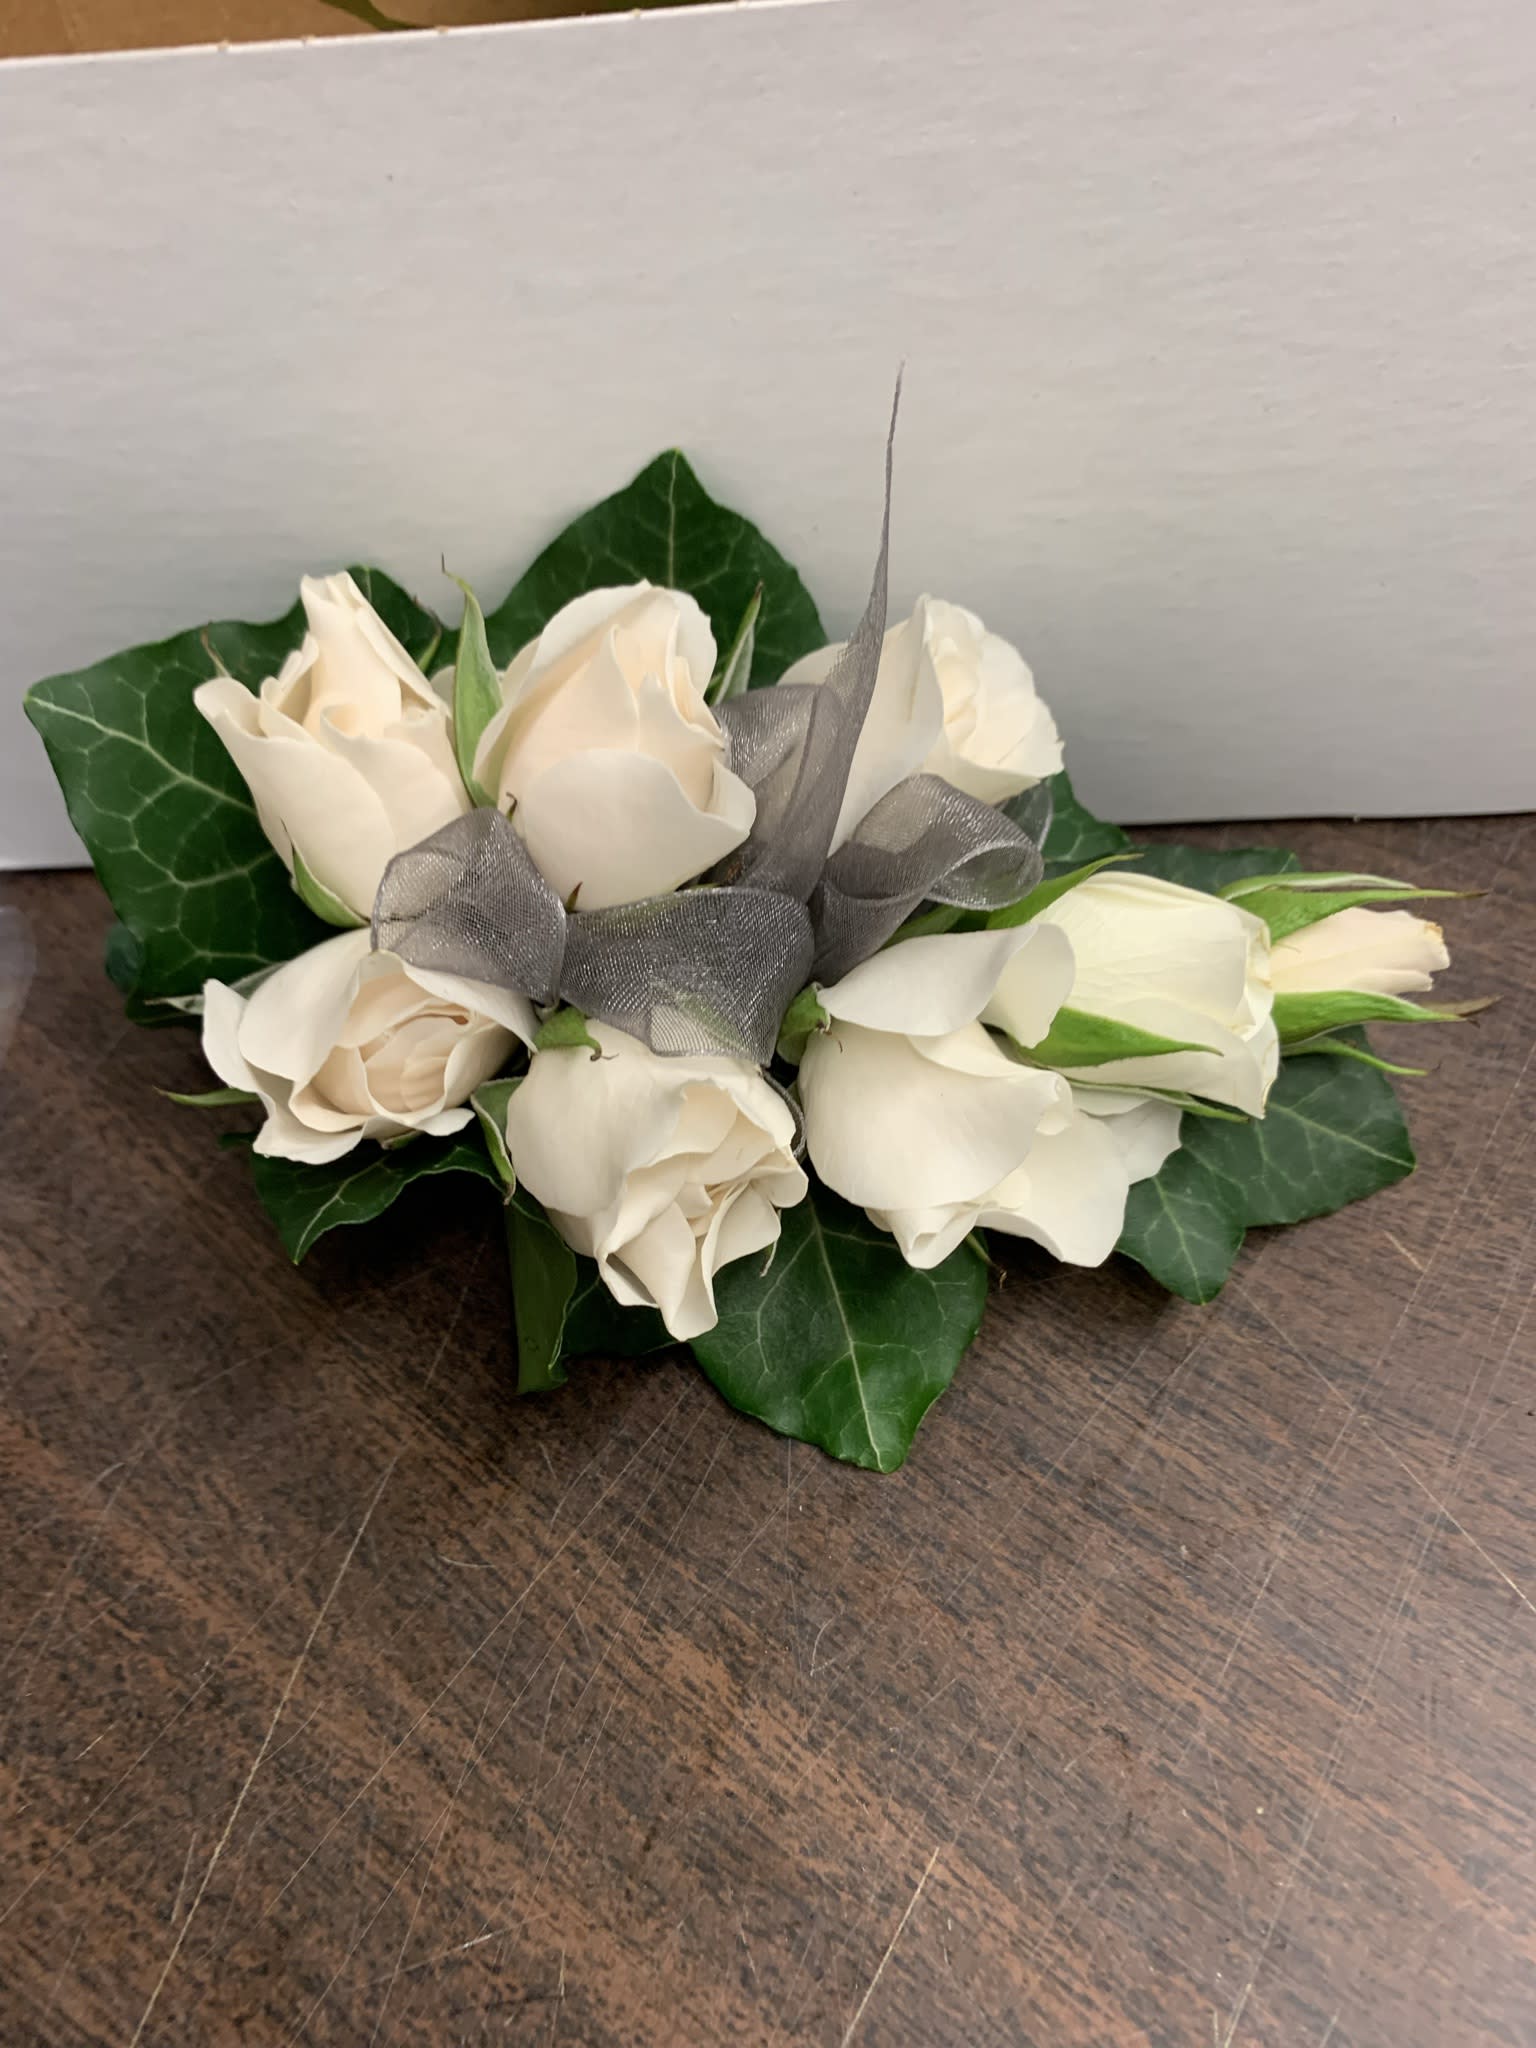 White Rose wrist corsage - Delicately crafted white spray rose, green Ivy leaves, A White ribbon completed the corsage. This corsage can be made  to pin on.  A different color ribbon can be used to match your attire  